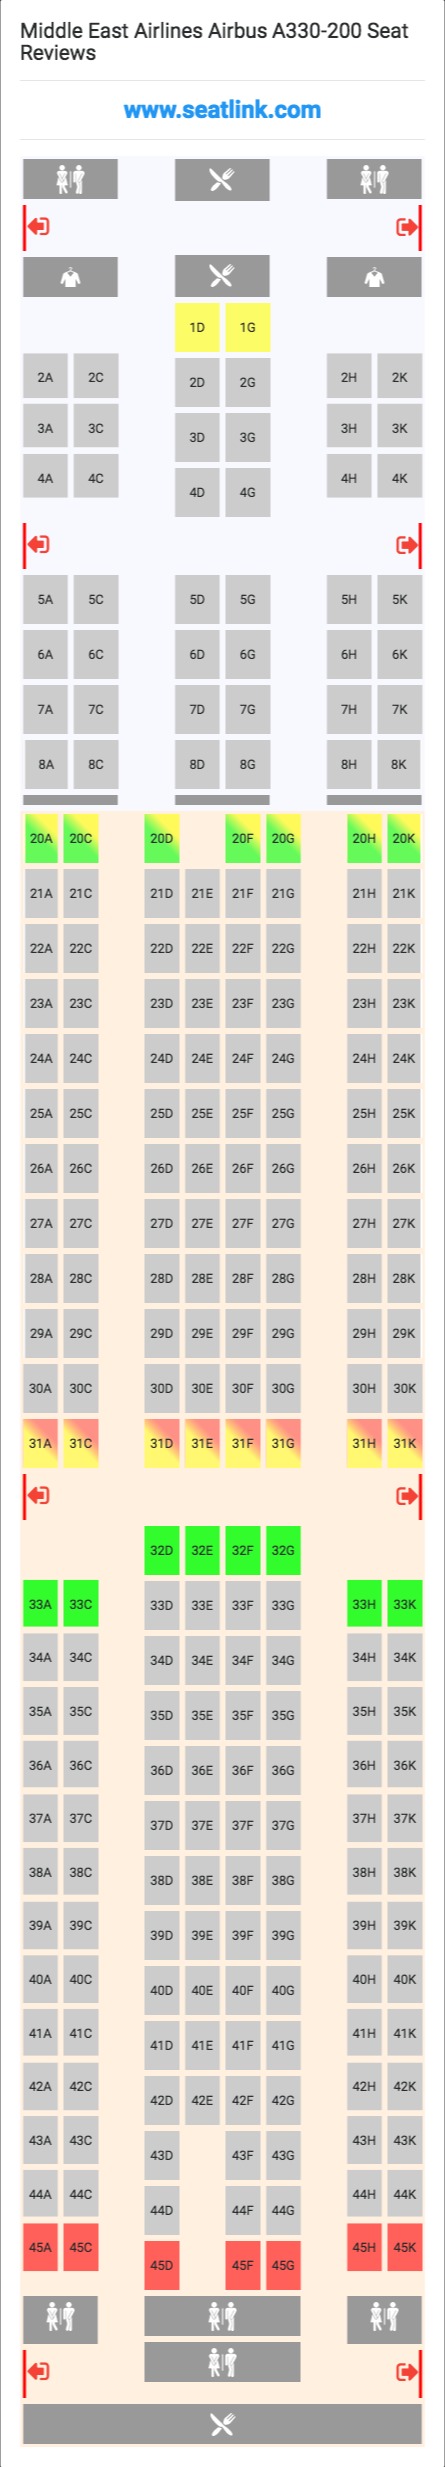 Avianca Airbus A330 Seating Chart